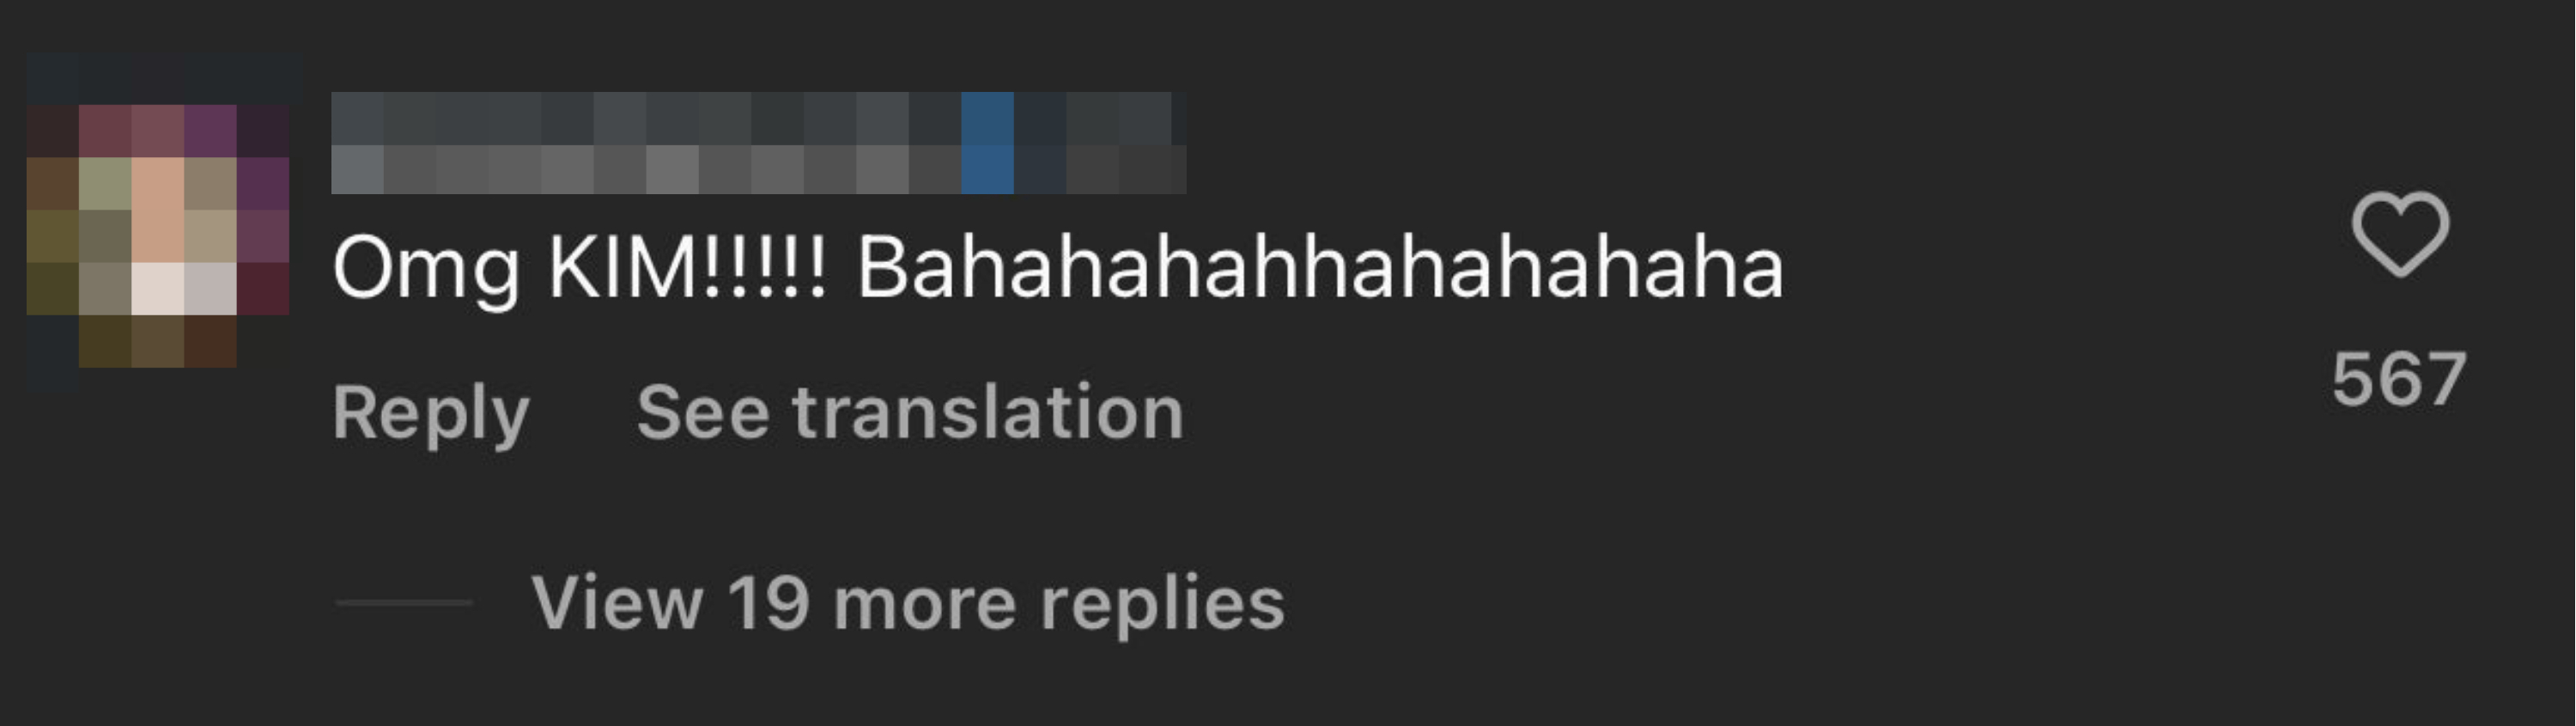 Screenshot of a social media comment by user simoneharouche reacting to KIM with laughter